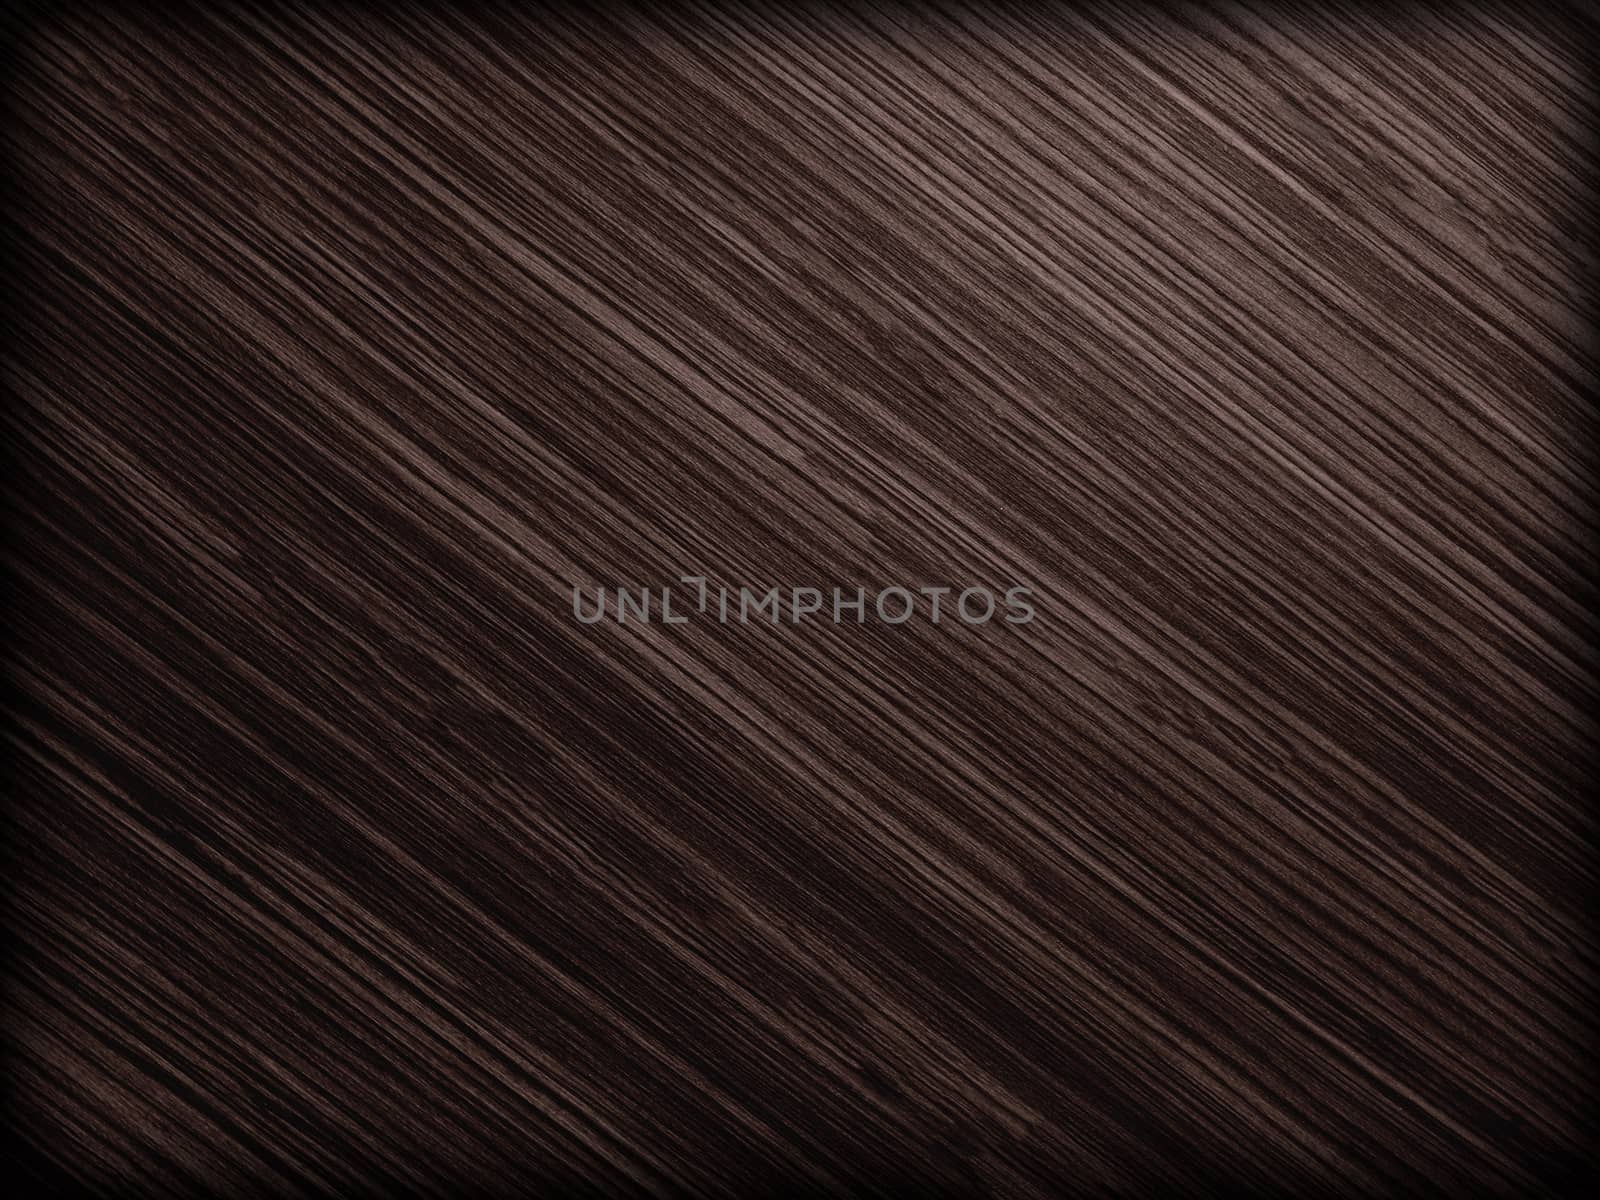 Dark brown tiles with rough textured surface imitation wood